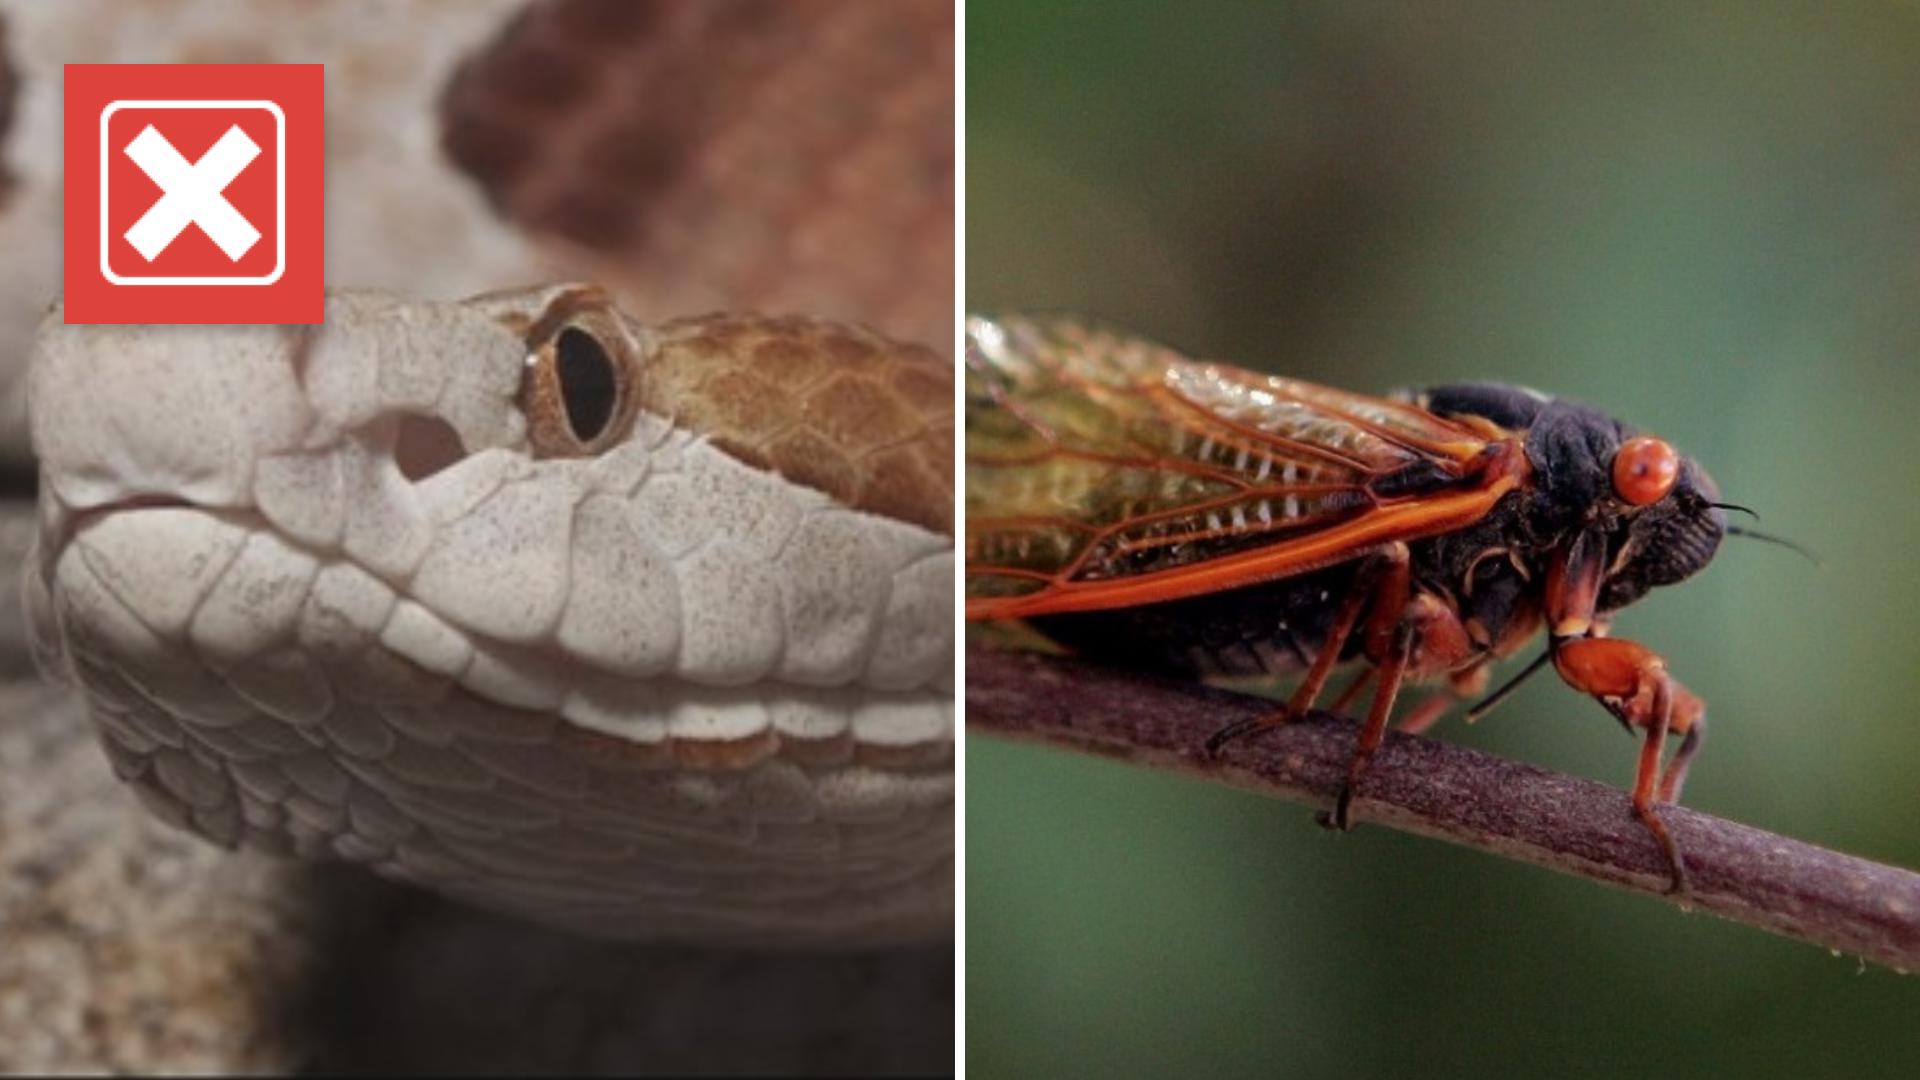 The snakes will eat cicadas, but their population doesn't boom during a cicada brood emergence. Here's why.